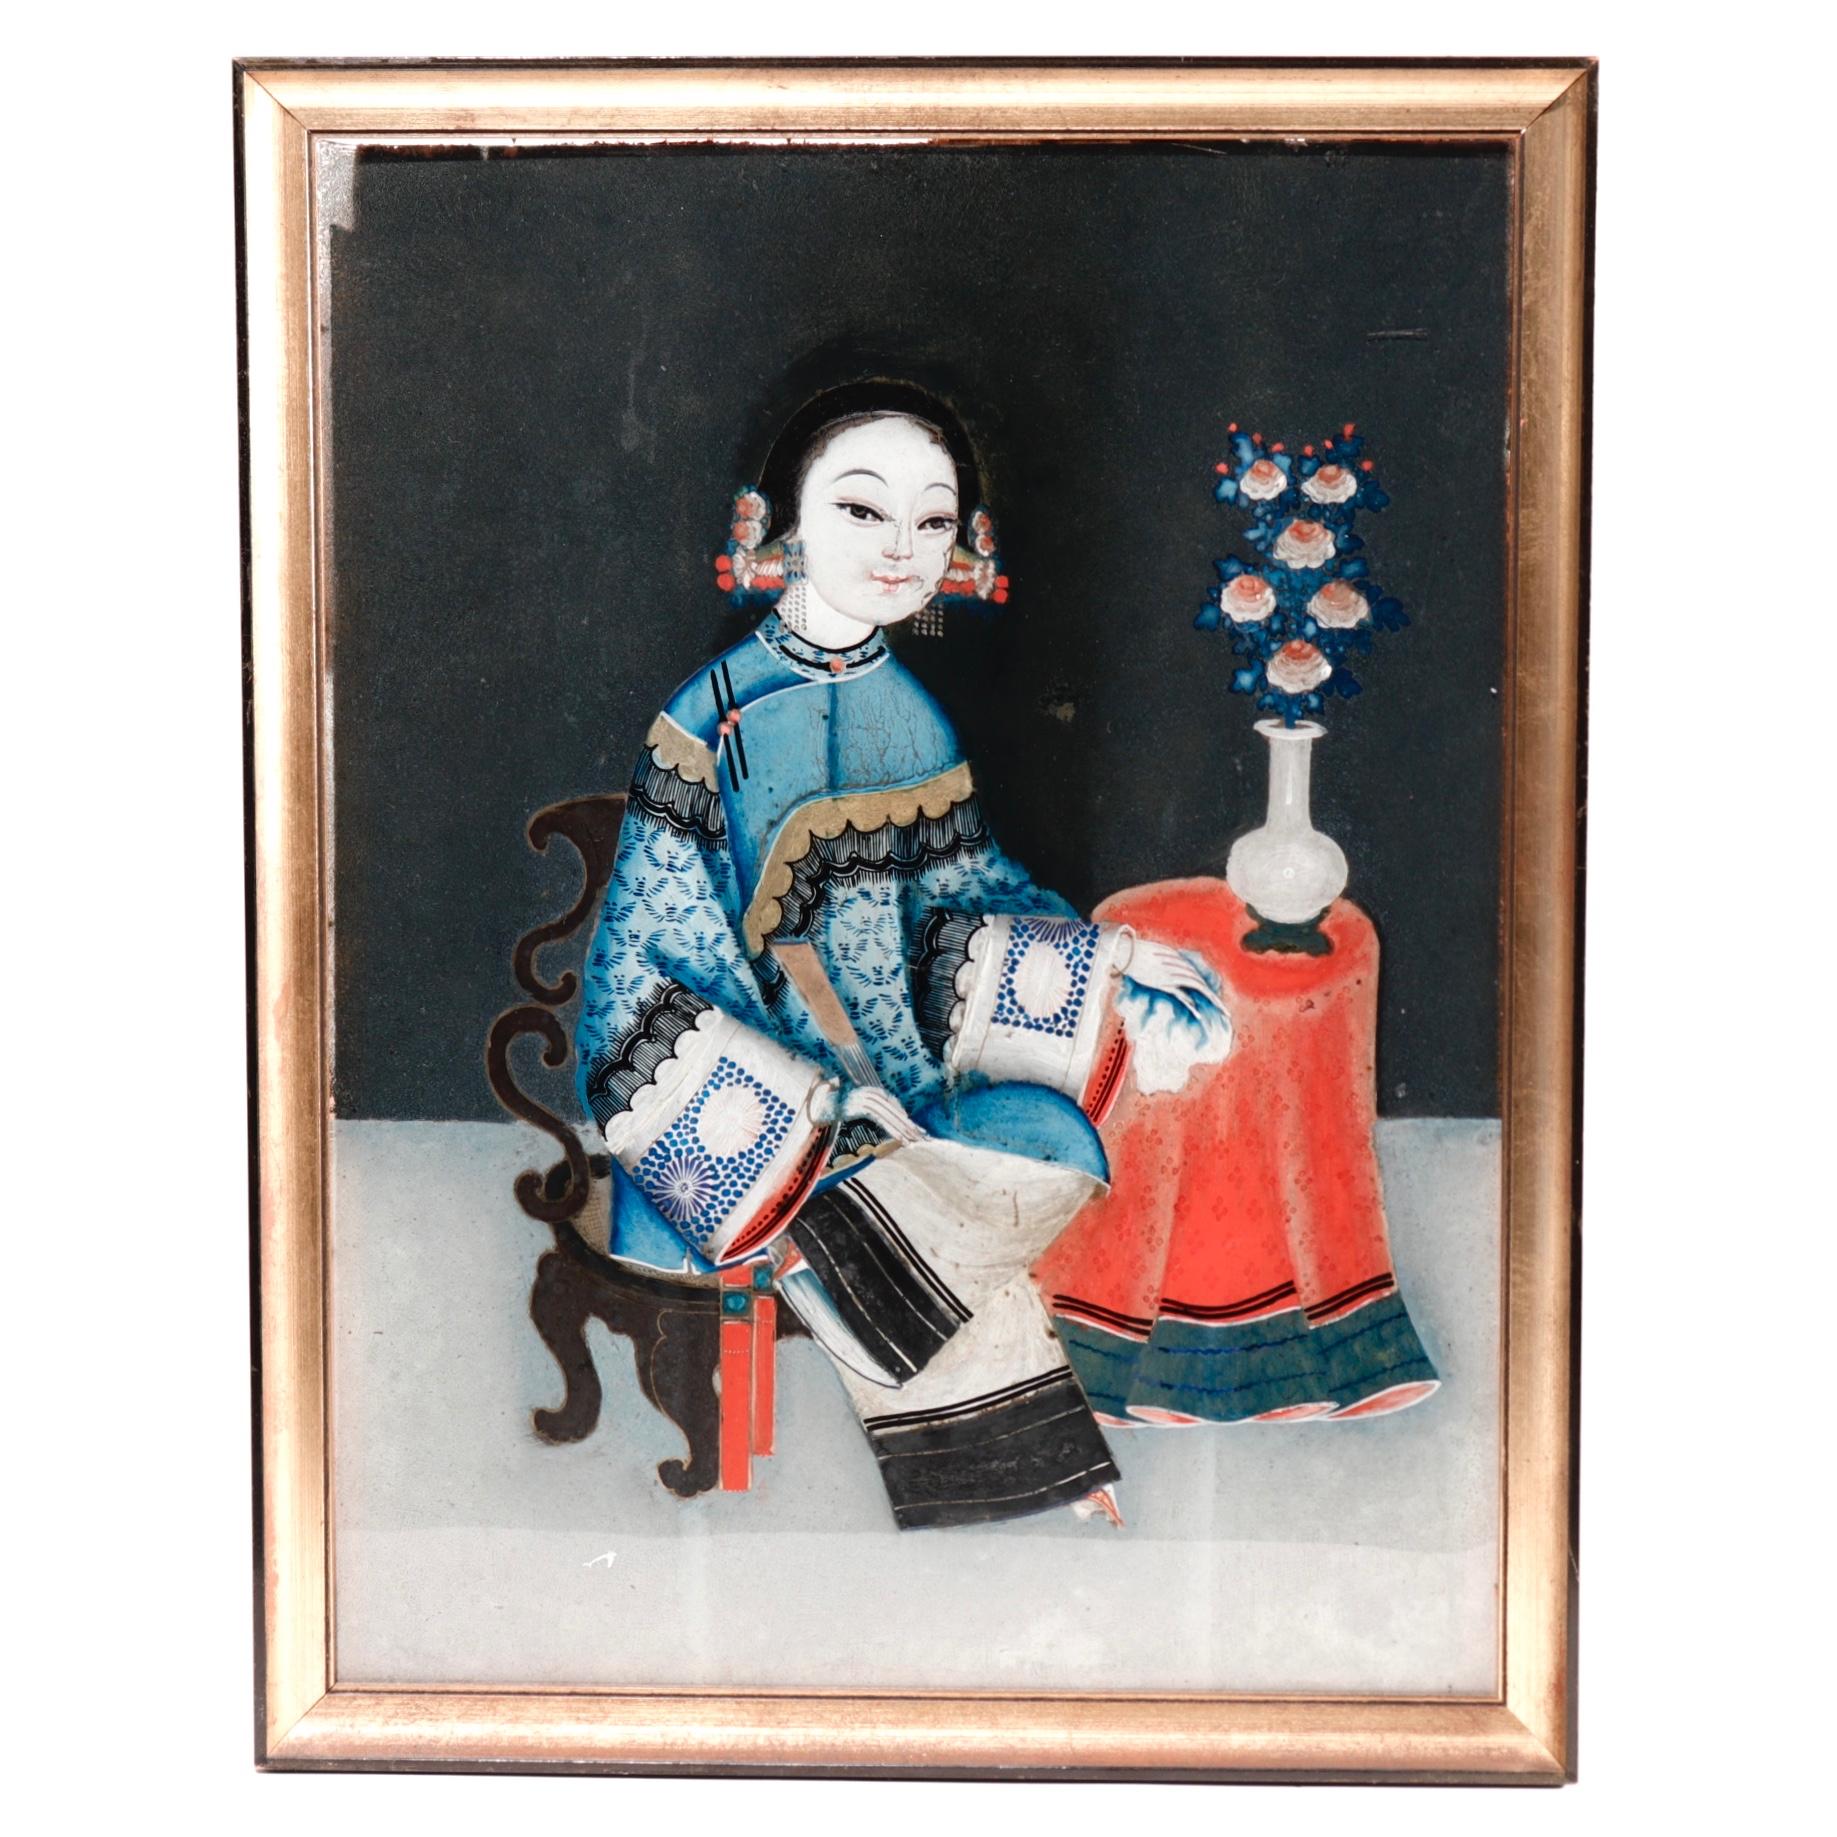 Chinese Pair of Reverse Glass Paintings, each depicting a young lady seated at a table, one with flute in hand, the other with a fan, each seated on a chair with a red cover cloth and in the background a covered table bearing a flower vase, the